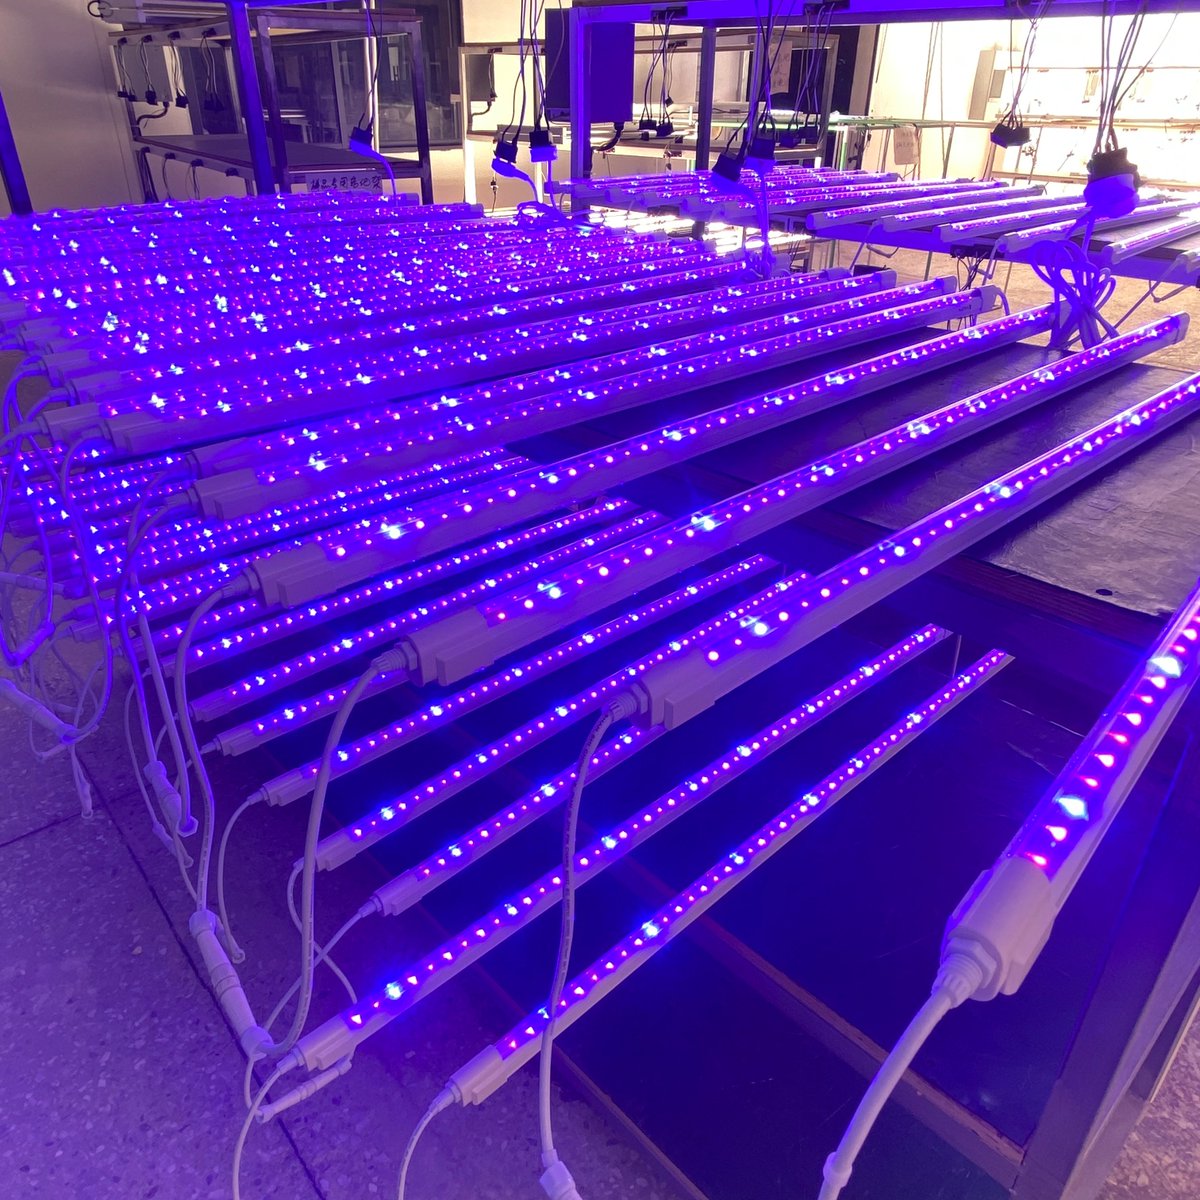 HongYi 25W*2pcs-UV+FR light strips--more options for grow lights
contact me.
Email:sumer@hongyidg.com
Skype &WhatsApp & Wechat 86 18186844638
#GrowLed #GrowLights  #CannabisCommunity  #CommercialGrow  #Hydroponics #420 #Cultivation  #hemp #HongYiHorticulture#bygrowersforgrowers